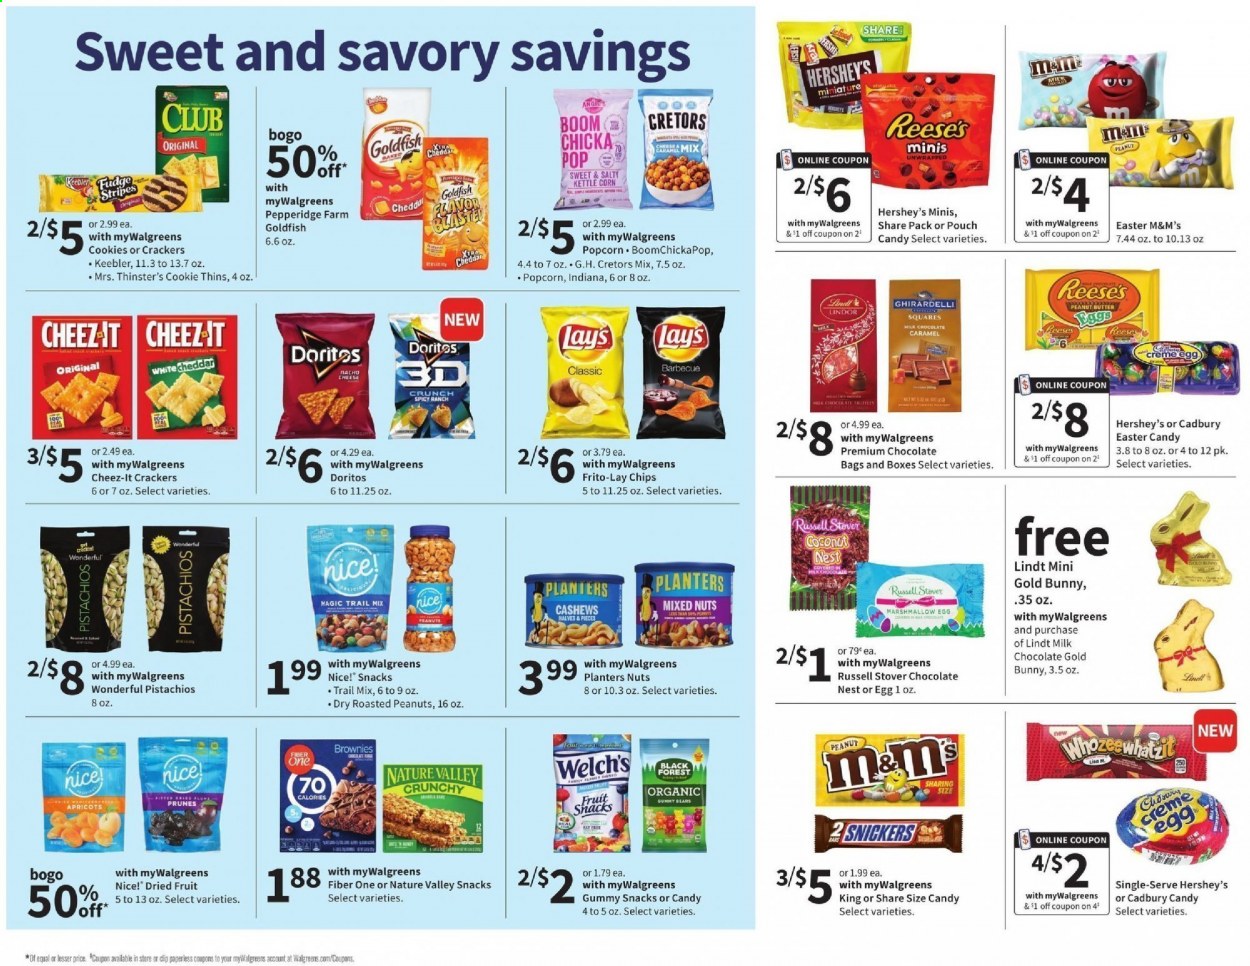 thumbnail - Walgreens Flyer - 02/28/2021 - 03/06/2021 - Sales products - Welch's, Reese's, Hershey's, cookies, fudge, milk chocolate, chocolate, Lindt, Snickers, M&M's, crackers, Cadbury, Ghirardelli, Keebler, Doritos, kettle corn, chips, snack, Lay’s, Thins, popcorn, Goldfish, Frito-Lay, Nice!, Nature Valley, Fiber One, caramel, cashews, roasted peanuts, peanuts, dried fruit, pistachios, mixed nuts, Planters, prunes. Page 5.